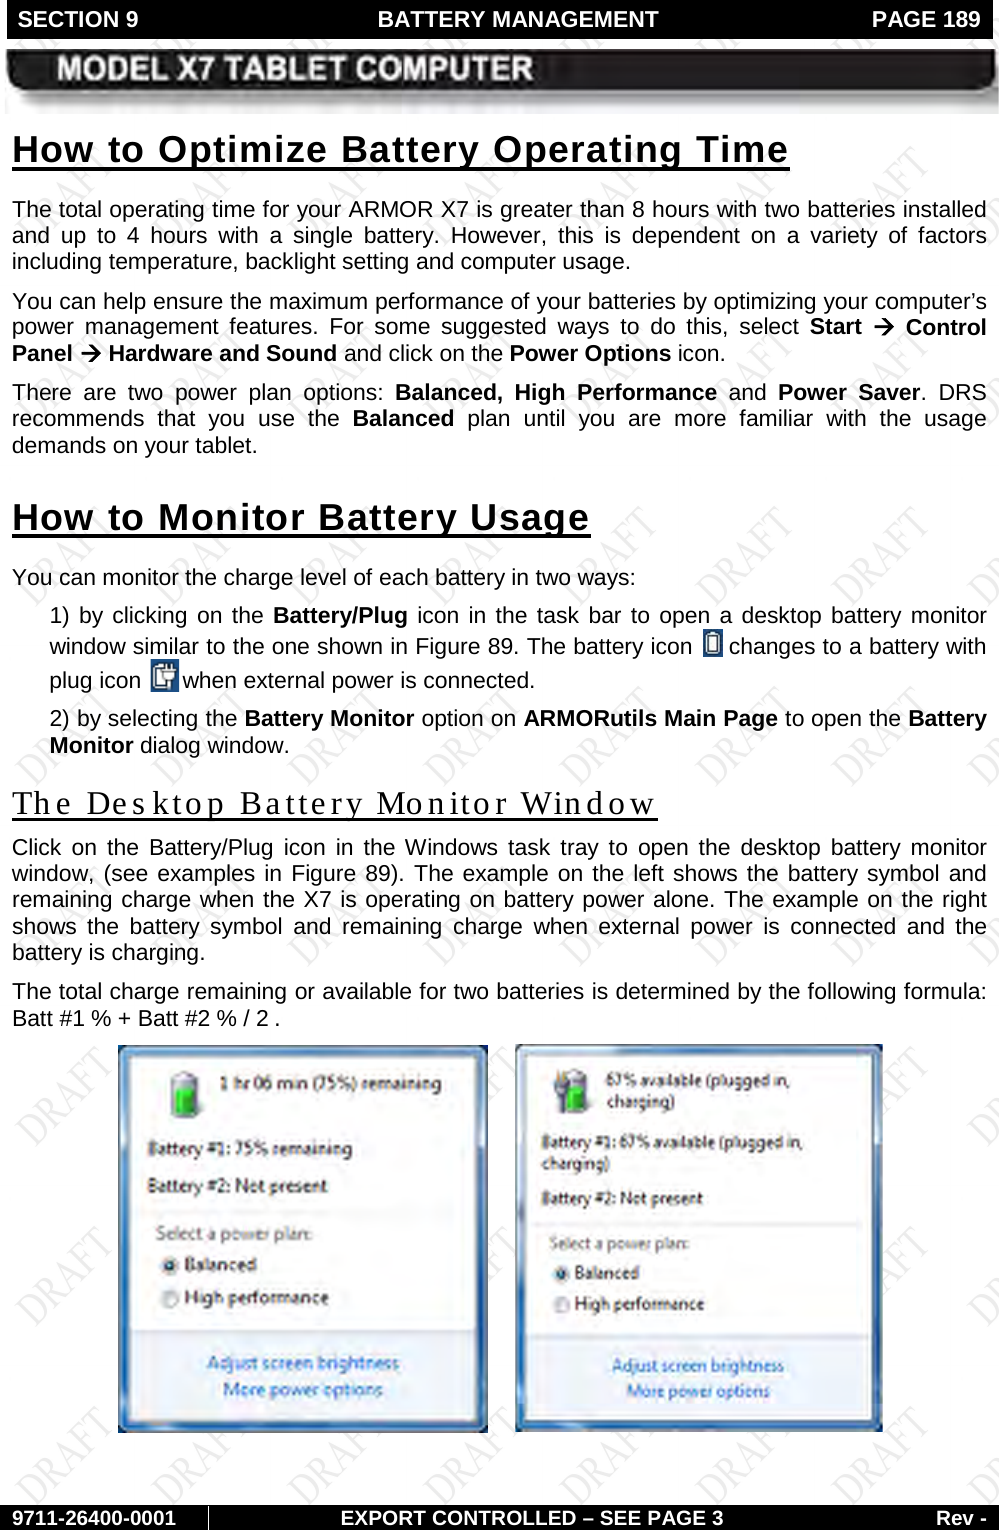 SECTION 9  BATTERY MANAGEMENT  PAGE 189        9711-26400-0001 EXPORT CONTROLLED – SEE PAGE 3 Rev - The total operating time for your ARMOR X7 is greater than 8 hours with two batteries installed and up to 4 hours with a single battery. However, this is dependent on a variety of factors including temperature, backlight setting and computer usage.  How to Optimize Battery Operating Time You can help ensure the maximum performance of your batteries by optimizing your computer’s power management features. For some suggested ways to do this, select Start  à Control Panel à Hardware and Sound and click on the Power Options icon. There are two power plan options: Balanced, High Performance and  Power  Saver.  DRS recommends that you use the Balanced plan until you are more familiar with the usage demands on your tablet. You can monitor the charge level of each battery in two ways:  How to Monitor Battery Usage 1) by clicking on the Battery/Plug icon in the task bar to open a desktop battery monitor window similar to the one shown in Figure 89. The battery icon   changes to a battery with plug icon   when external power is connected. 2) by selecting the Battery Monitor option on ARMORutils Main Page to open the Battery Monitor dialog window.  Click on the Battery/Plug icon in the Windows task tray to open the desktop battery  monitor window, (see examples in The Des ktop Battery Monitor Window Figure 89). The example on the left shows the battery symbol and remaining charge when the X7 is operating on battery power alone. The example on the right shows the battery symbol and remaining charge when external power is connected and the battery is charging.  The total charge remaining or available for two batteries is determined by the following formula:  Batt #1 % + Batt #2 % / 2 .       